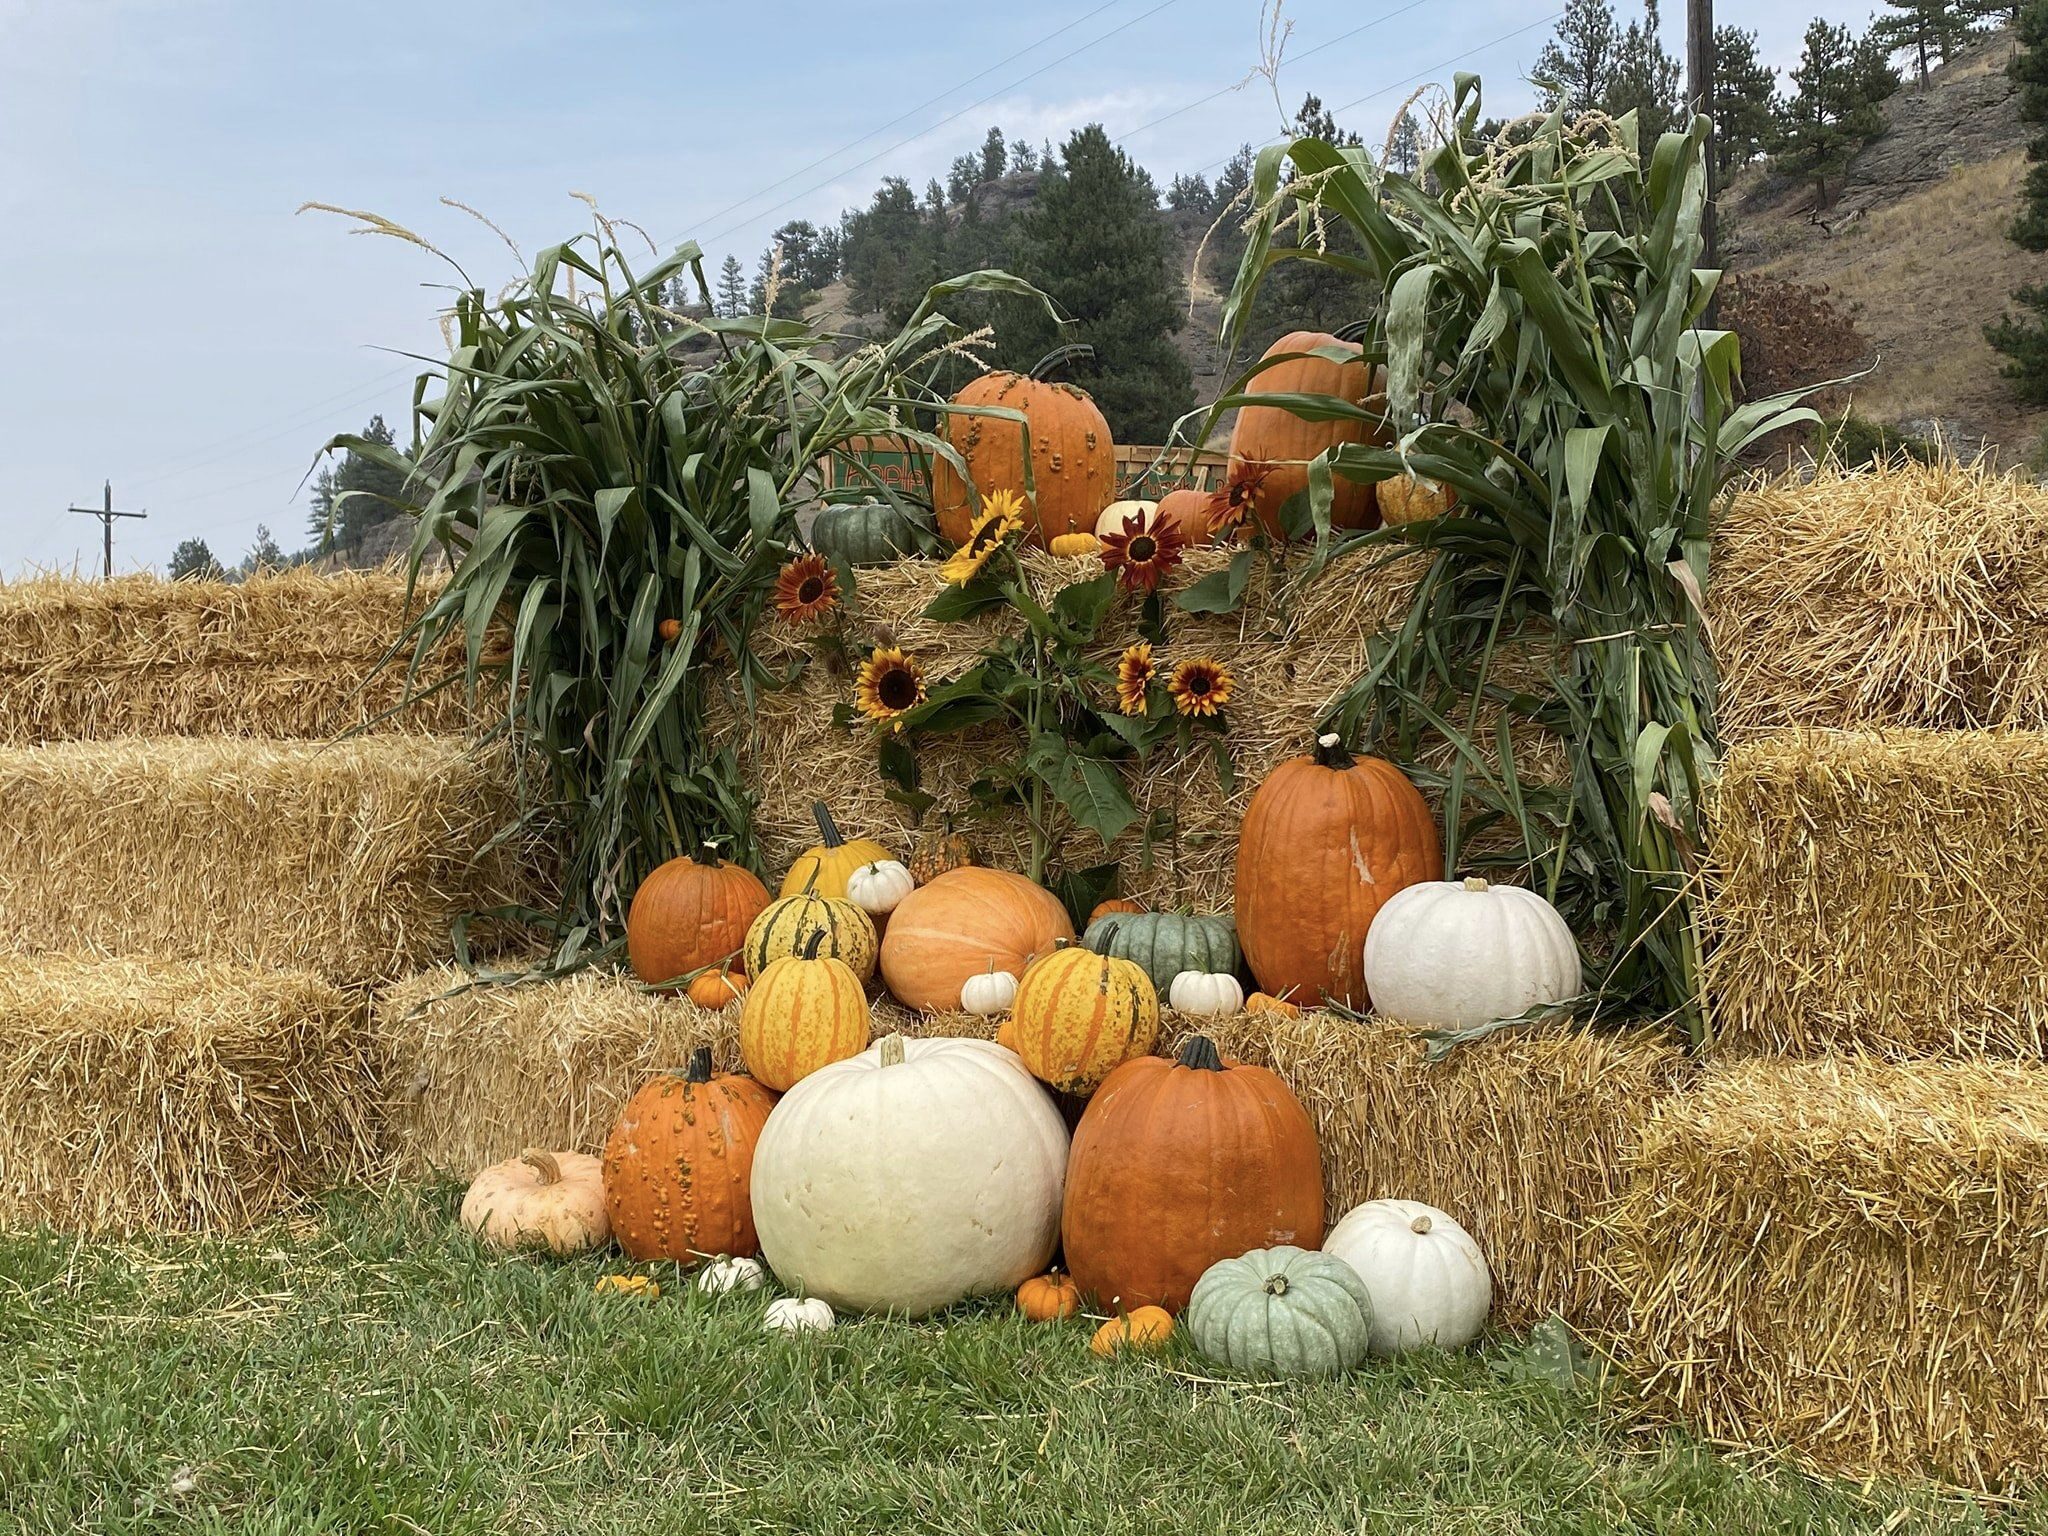 Pumpkins on display at Applestem along the Lewis and Clark National Historic Trail